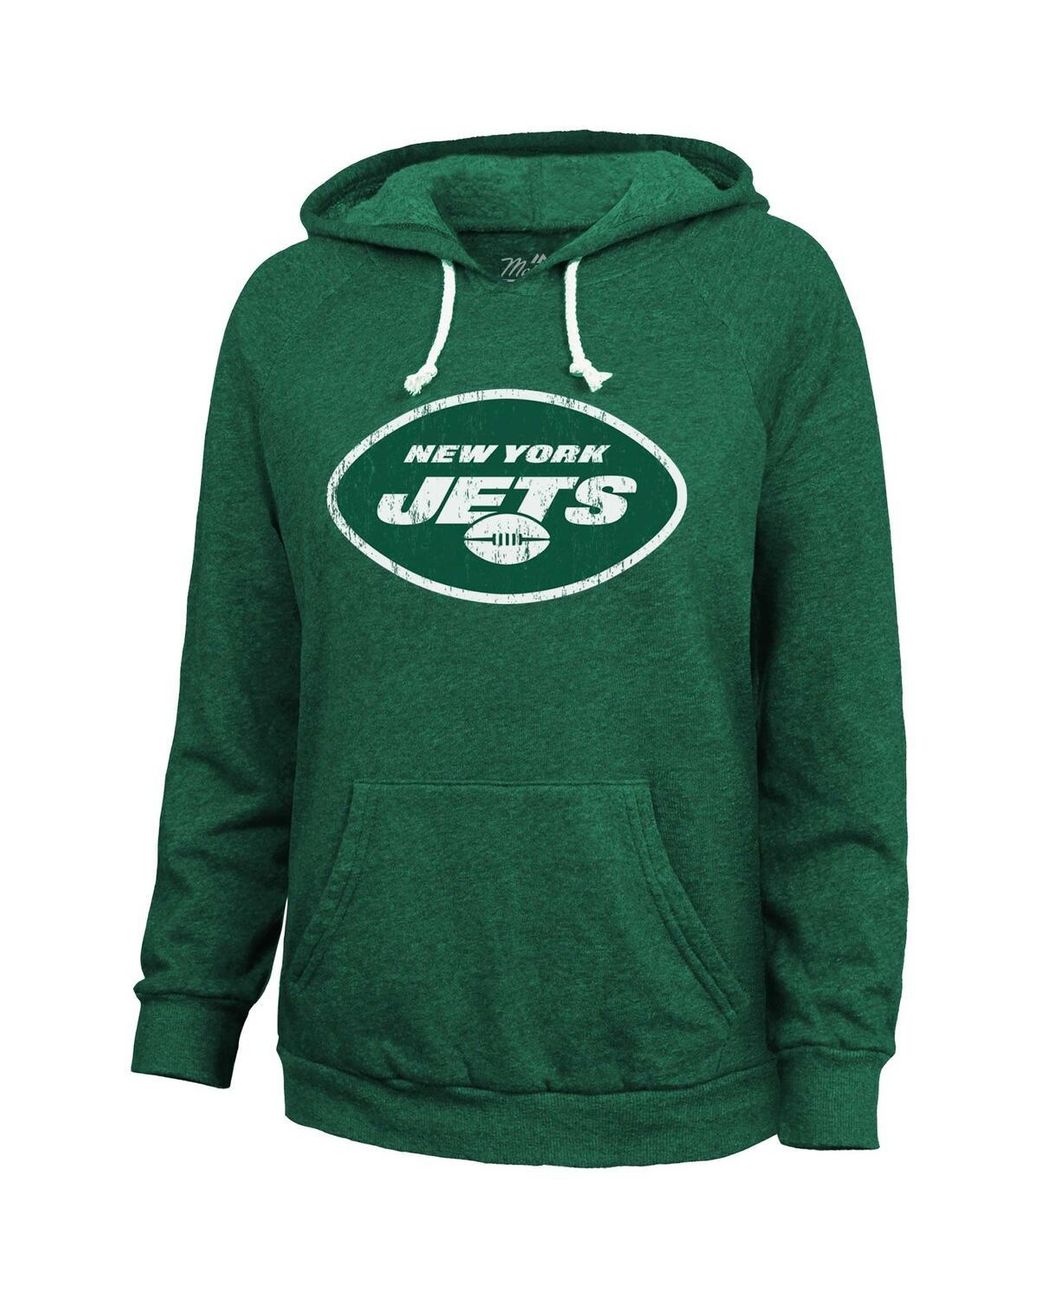 Women's Majestic Threads Sauce Gardner Green New York Jets Name & Number Off-Shoulder Script Cropped Long Sleeve V-Neck T-Shirt Size: Small